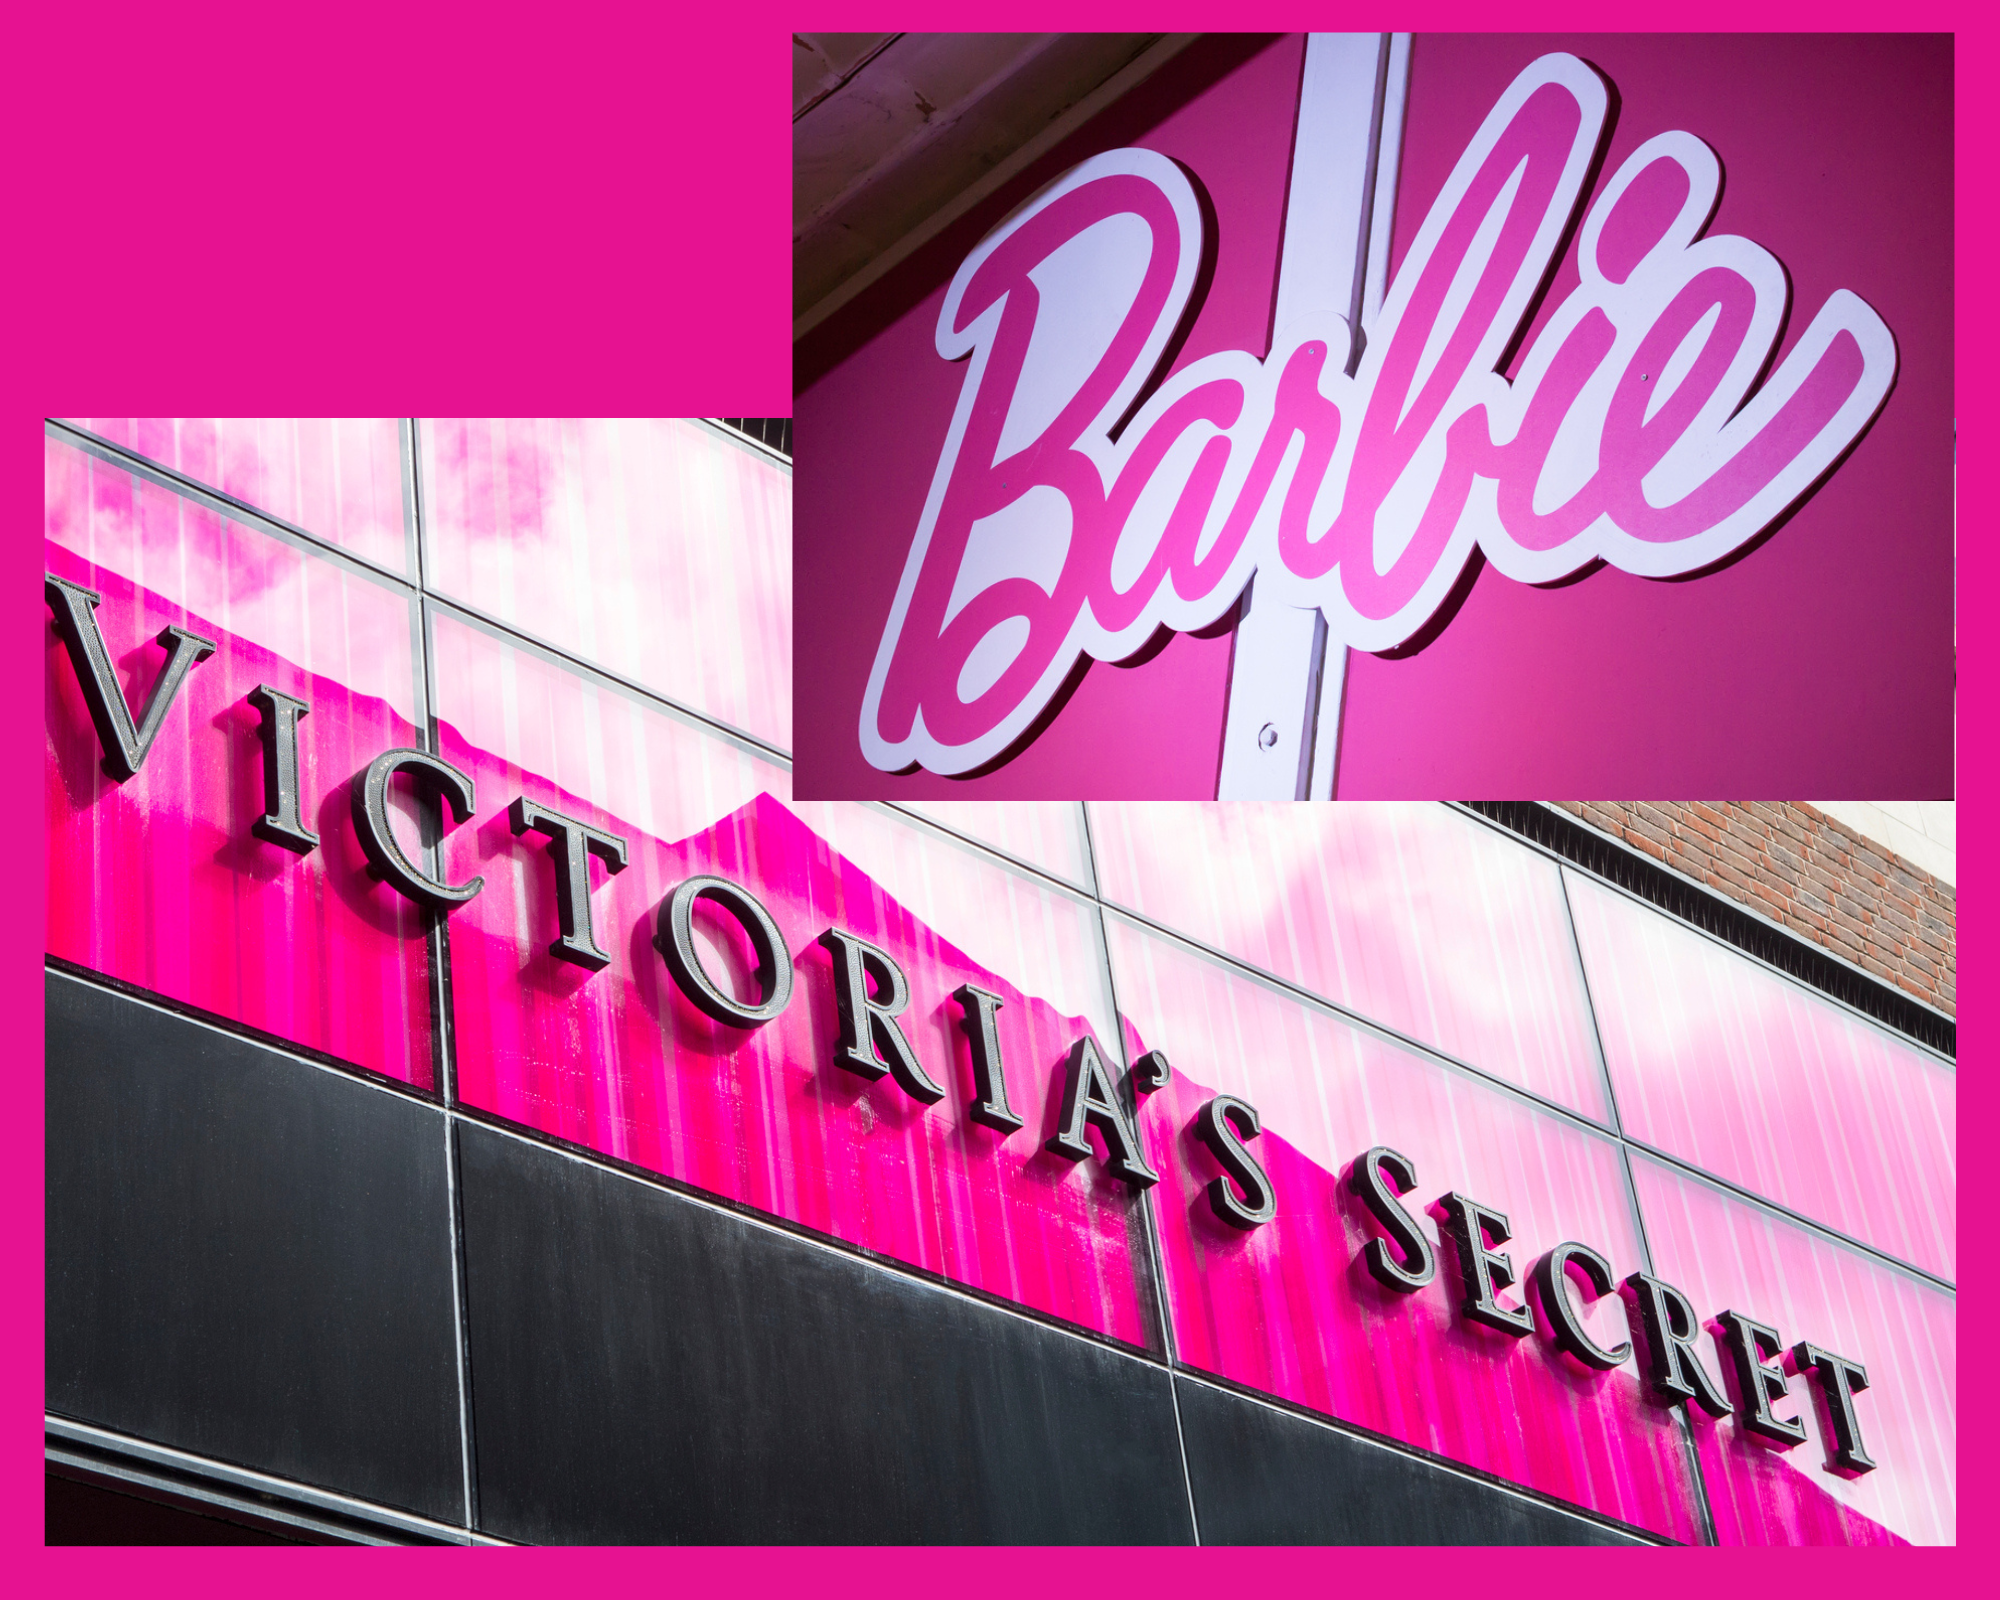 Pink logos of Victoria's Secret and Barbie